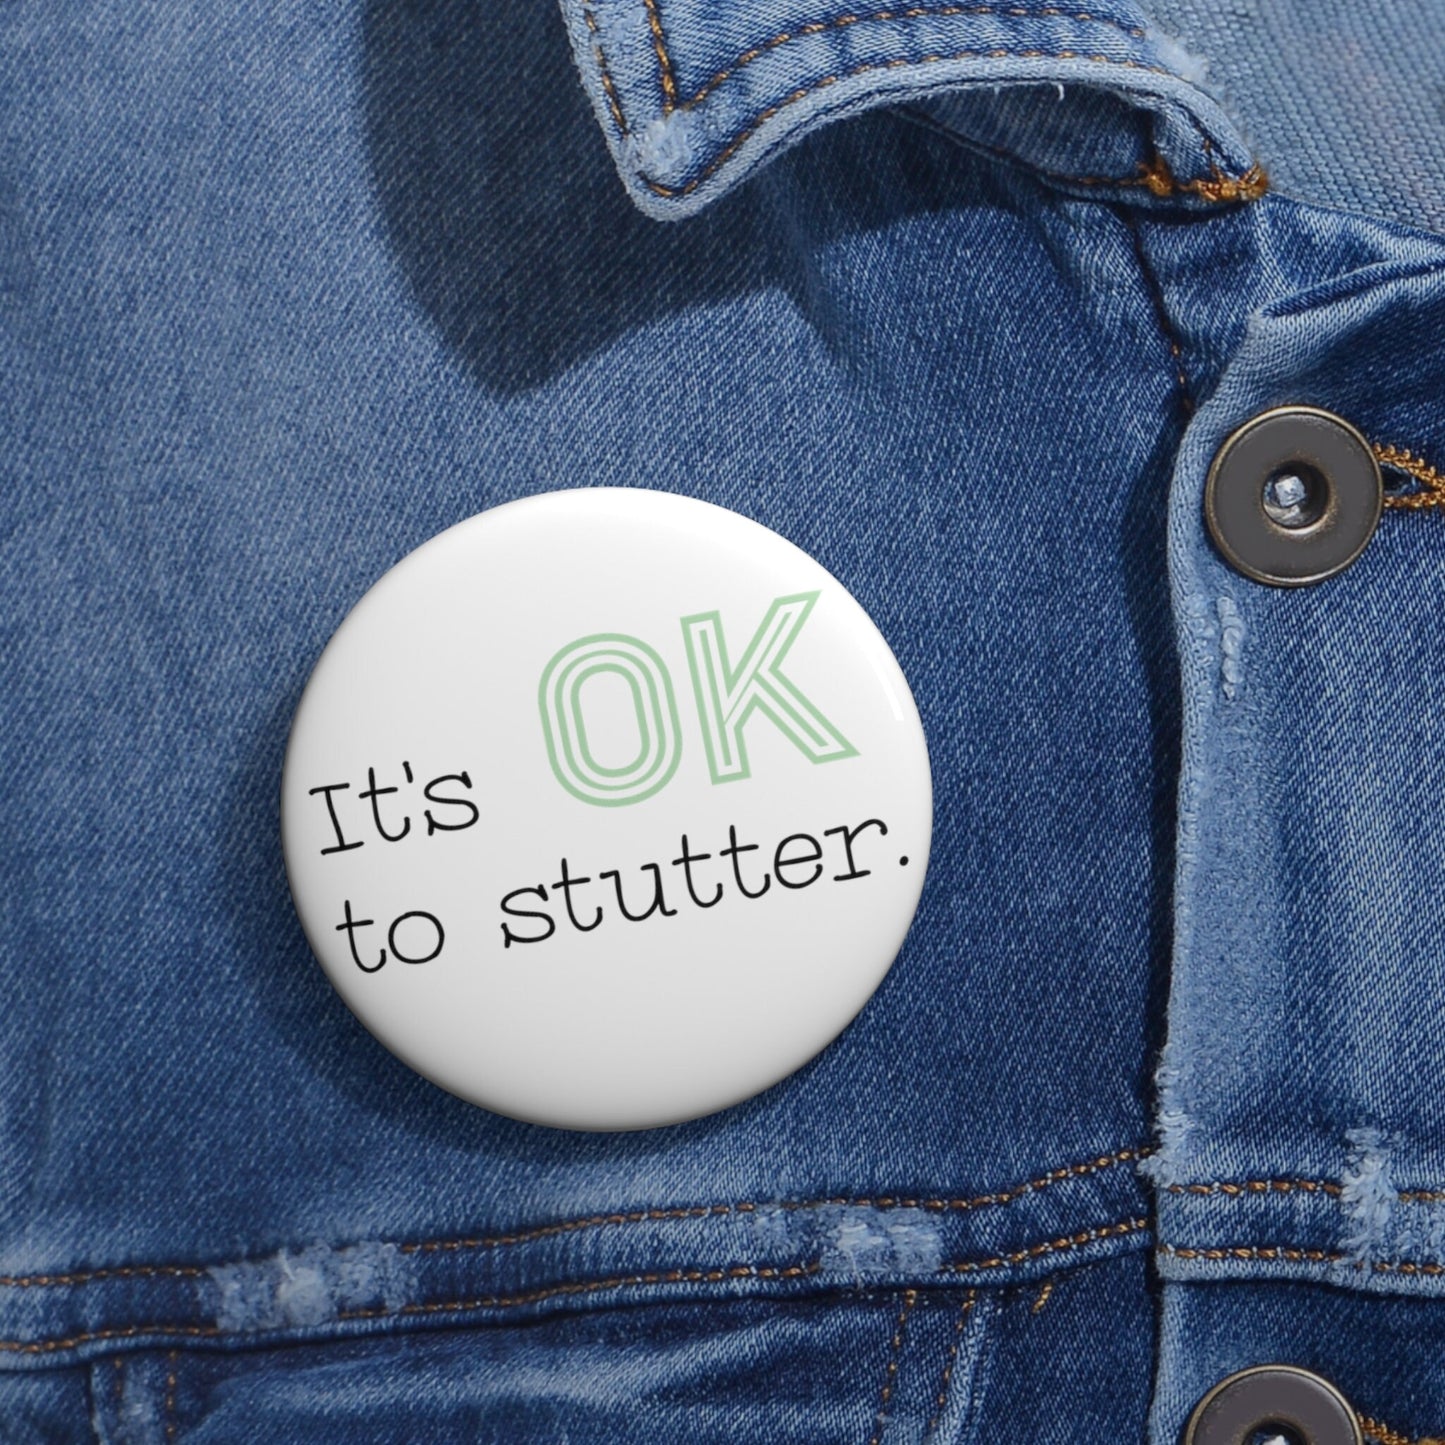 It's OK To Stutter Pin Button 1.25" 2.25" or 3"